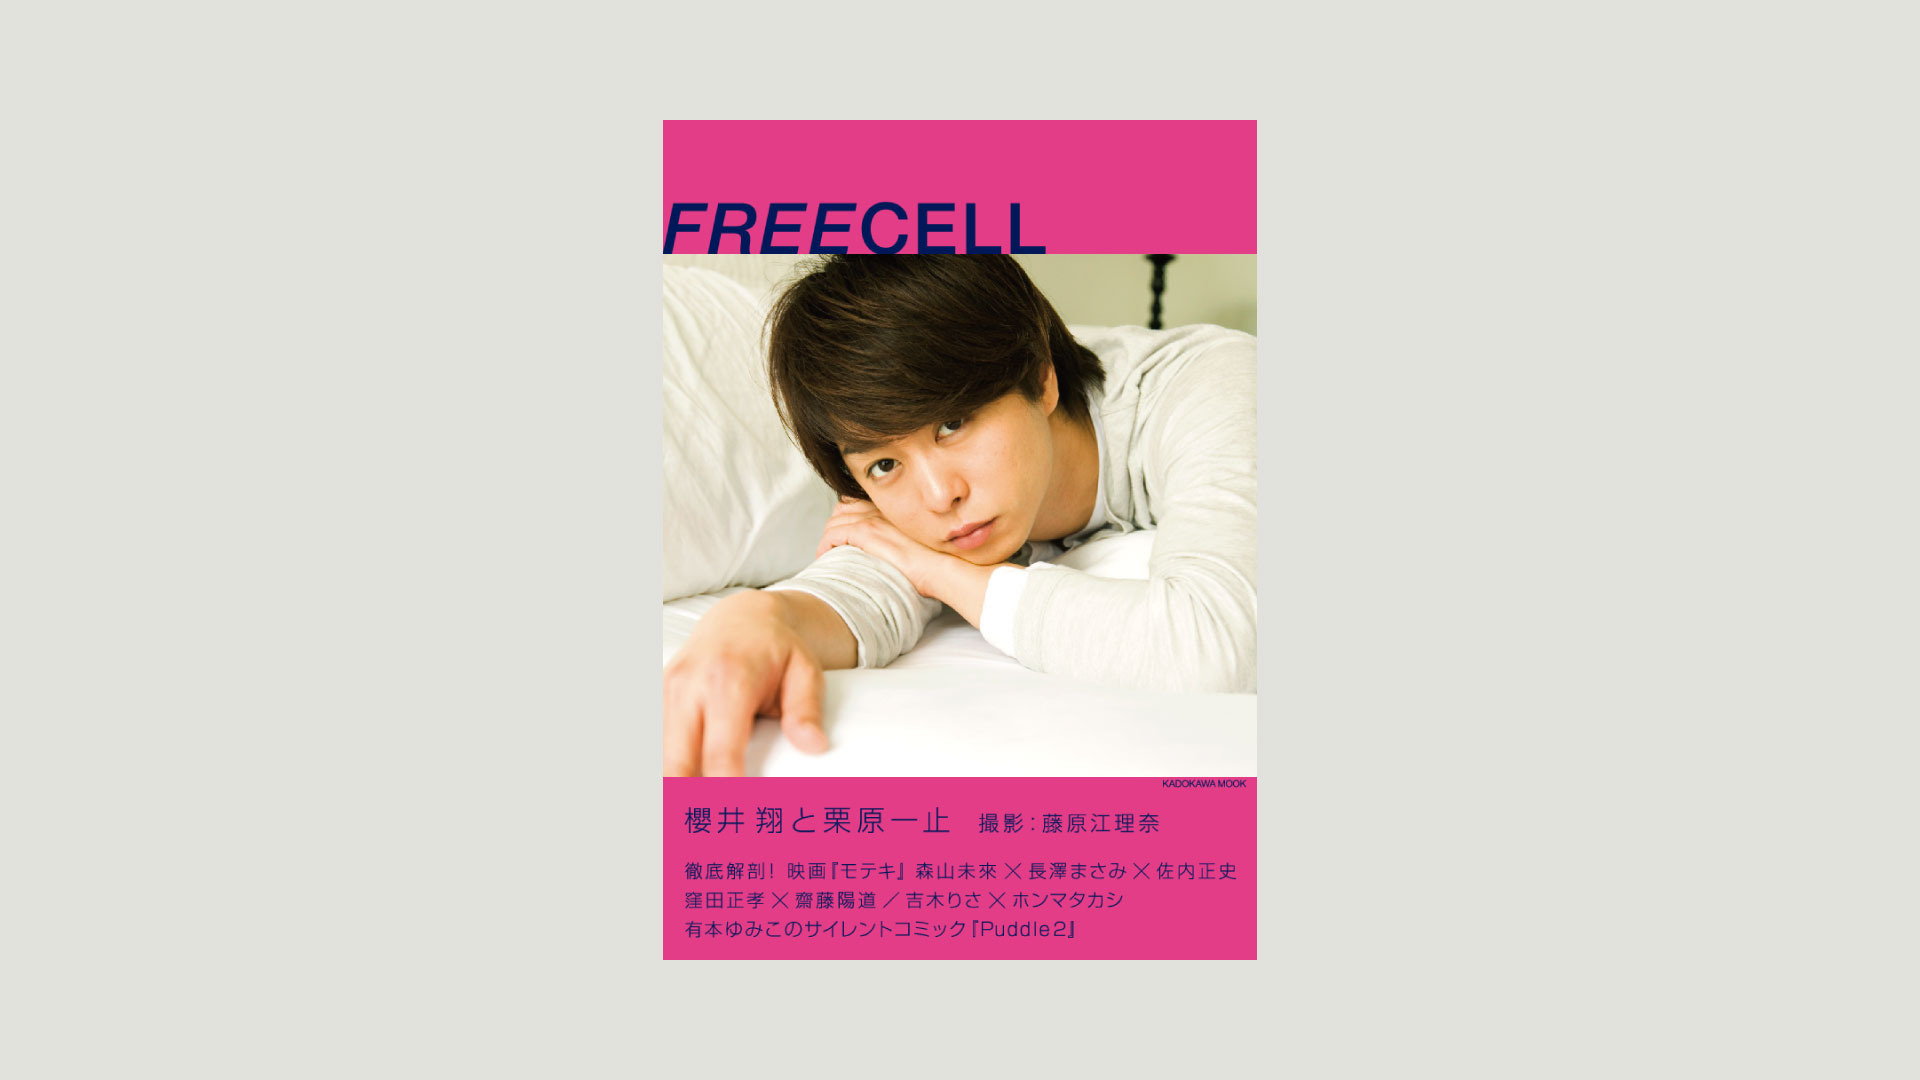 FREECELL